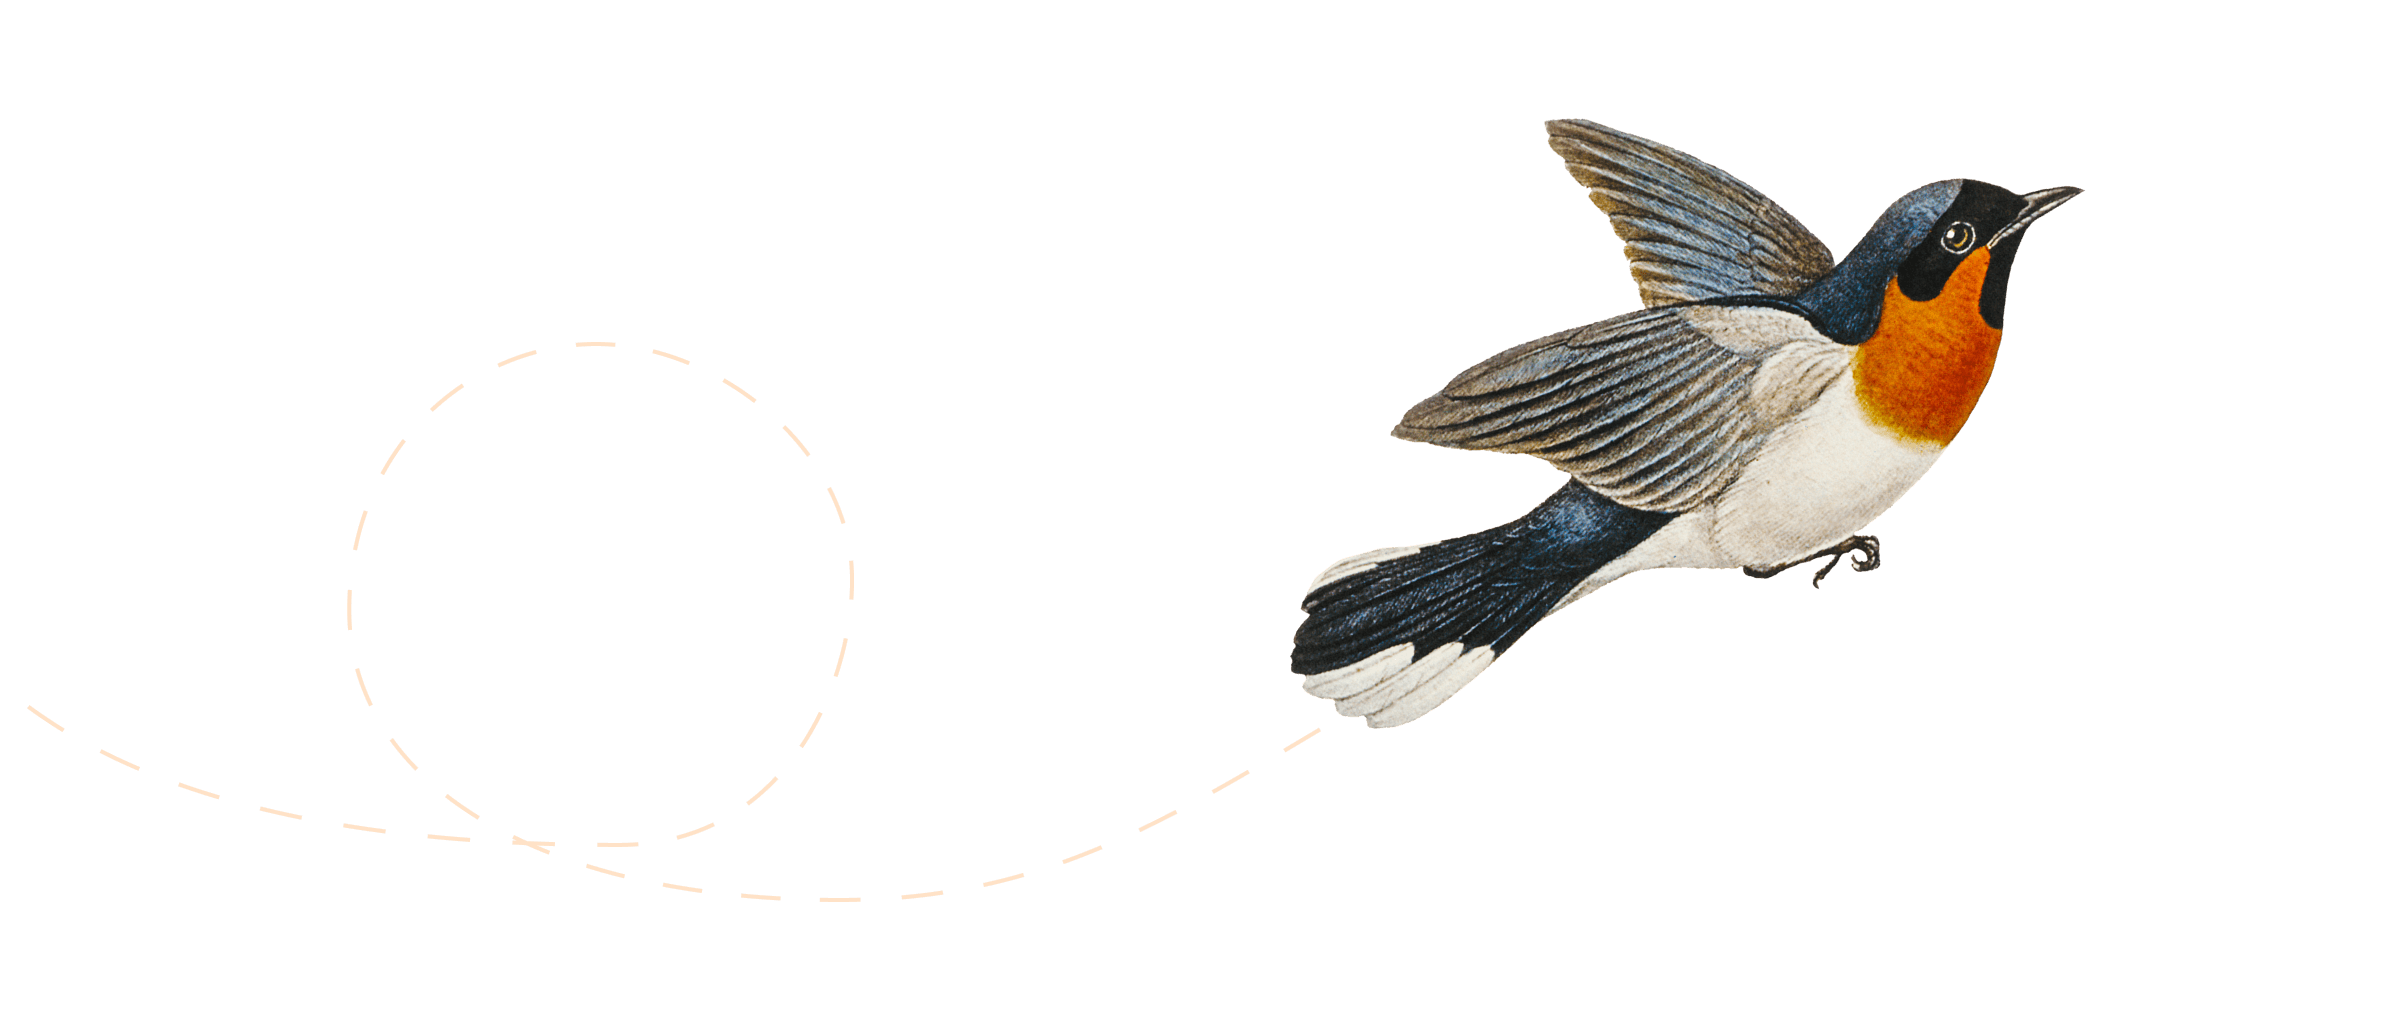 Trajectory of a flying bird.